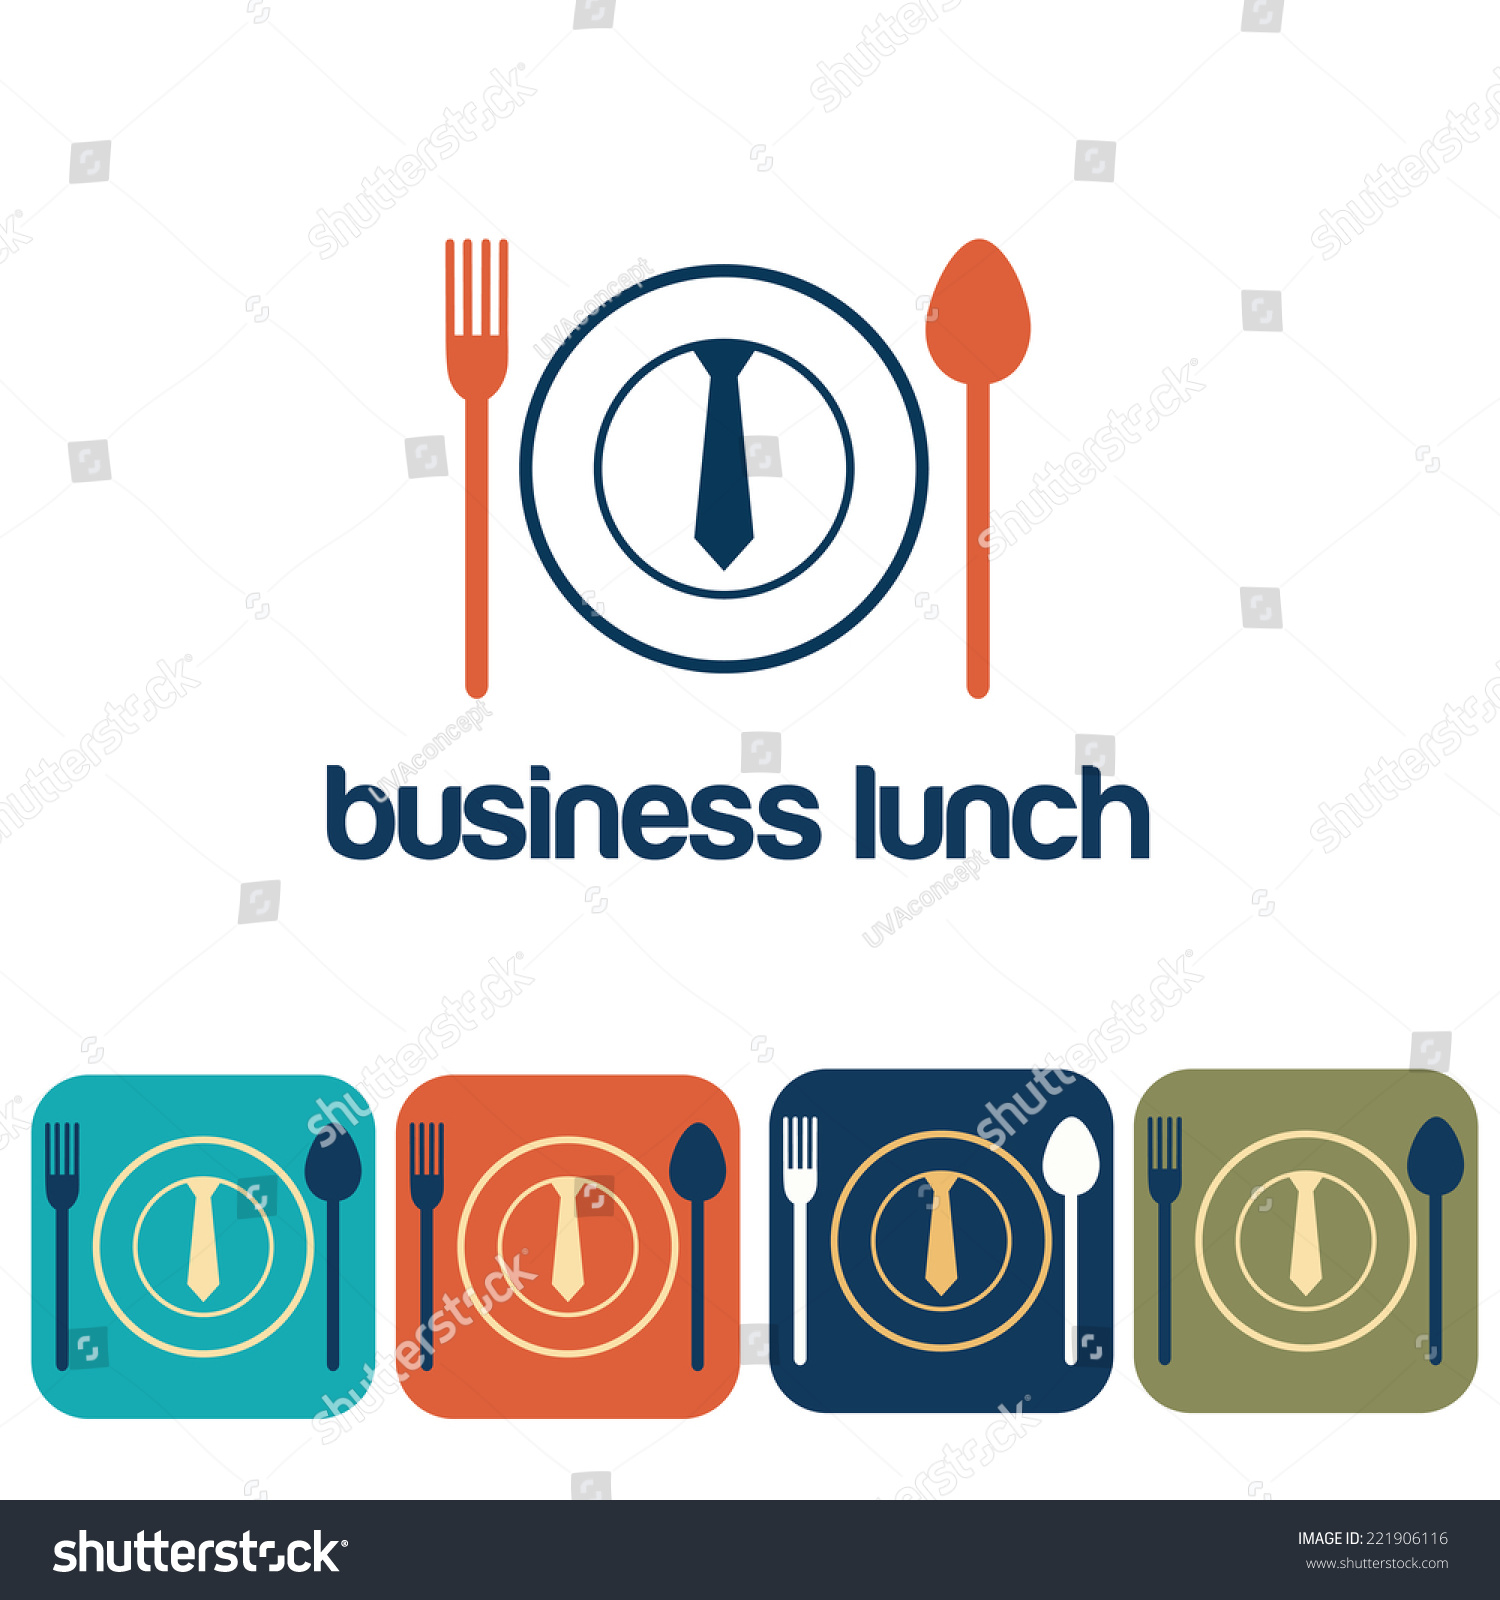 business lunch clipart - photo #4